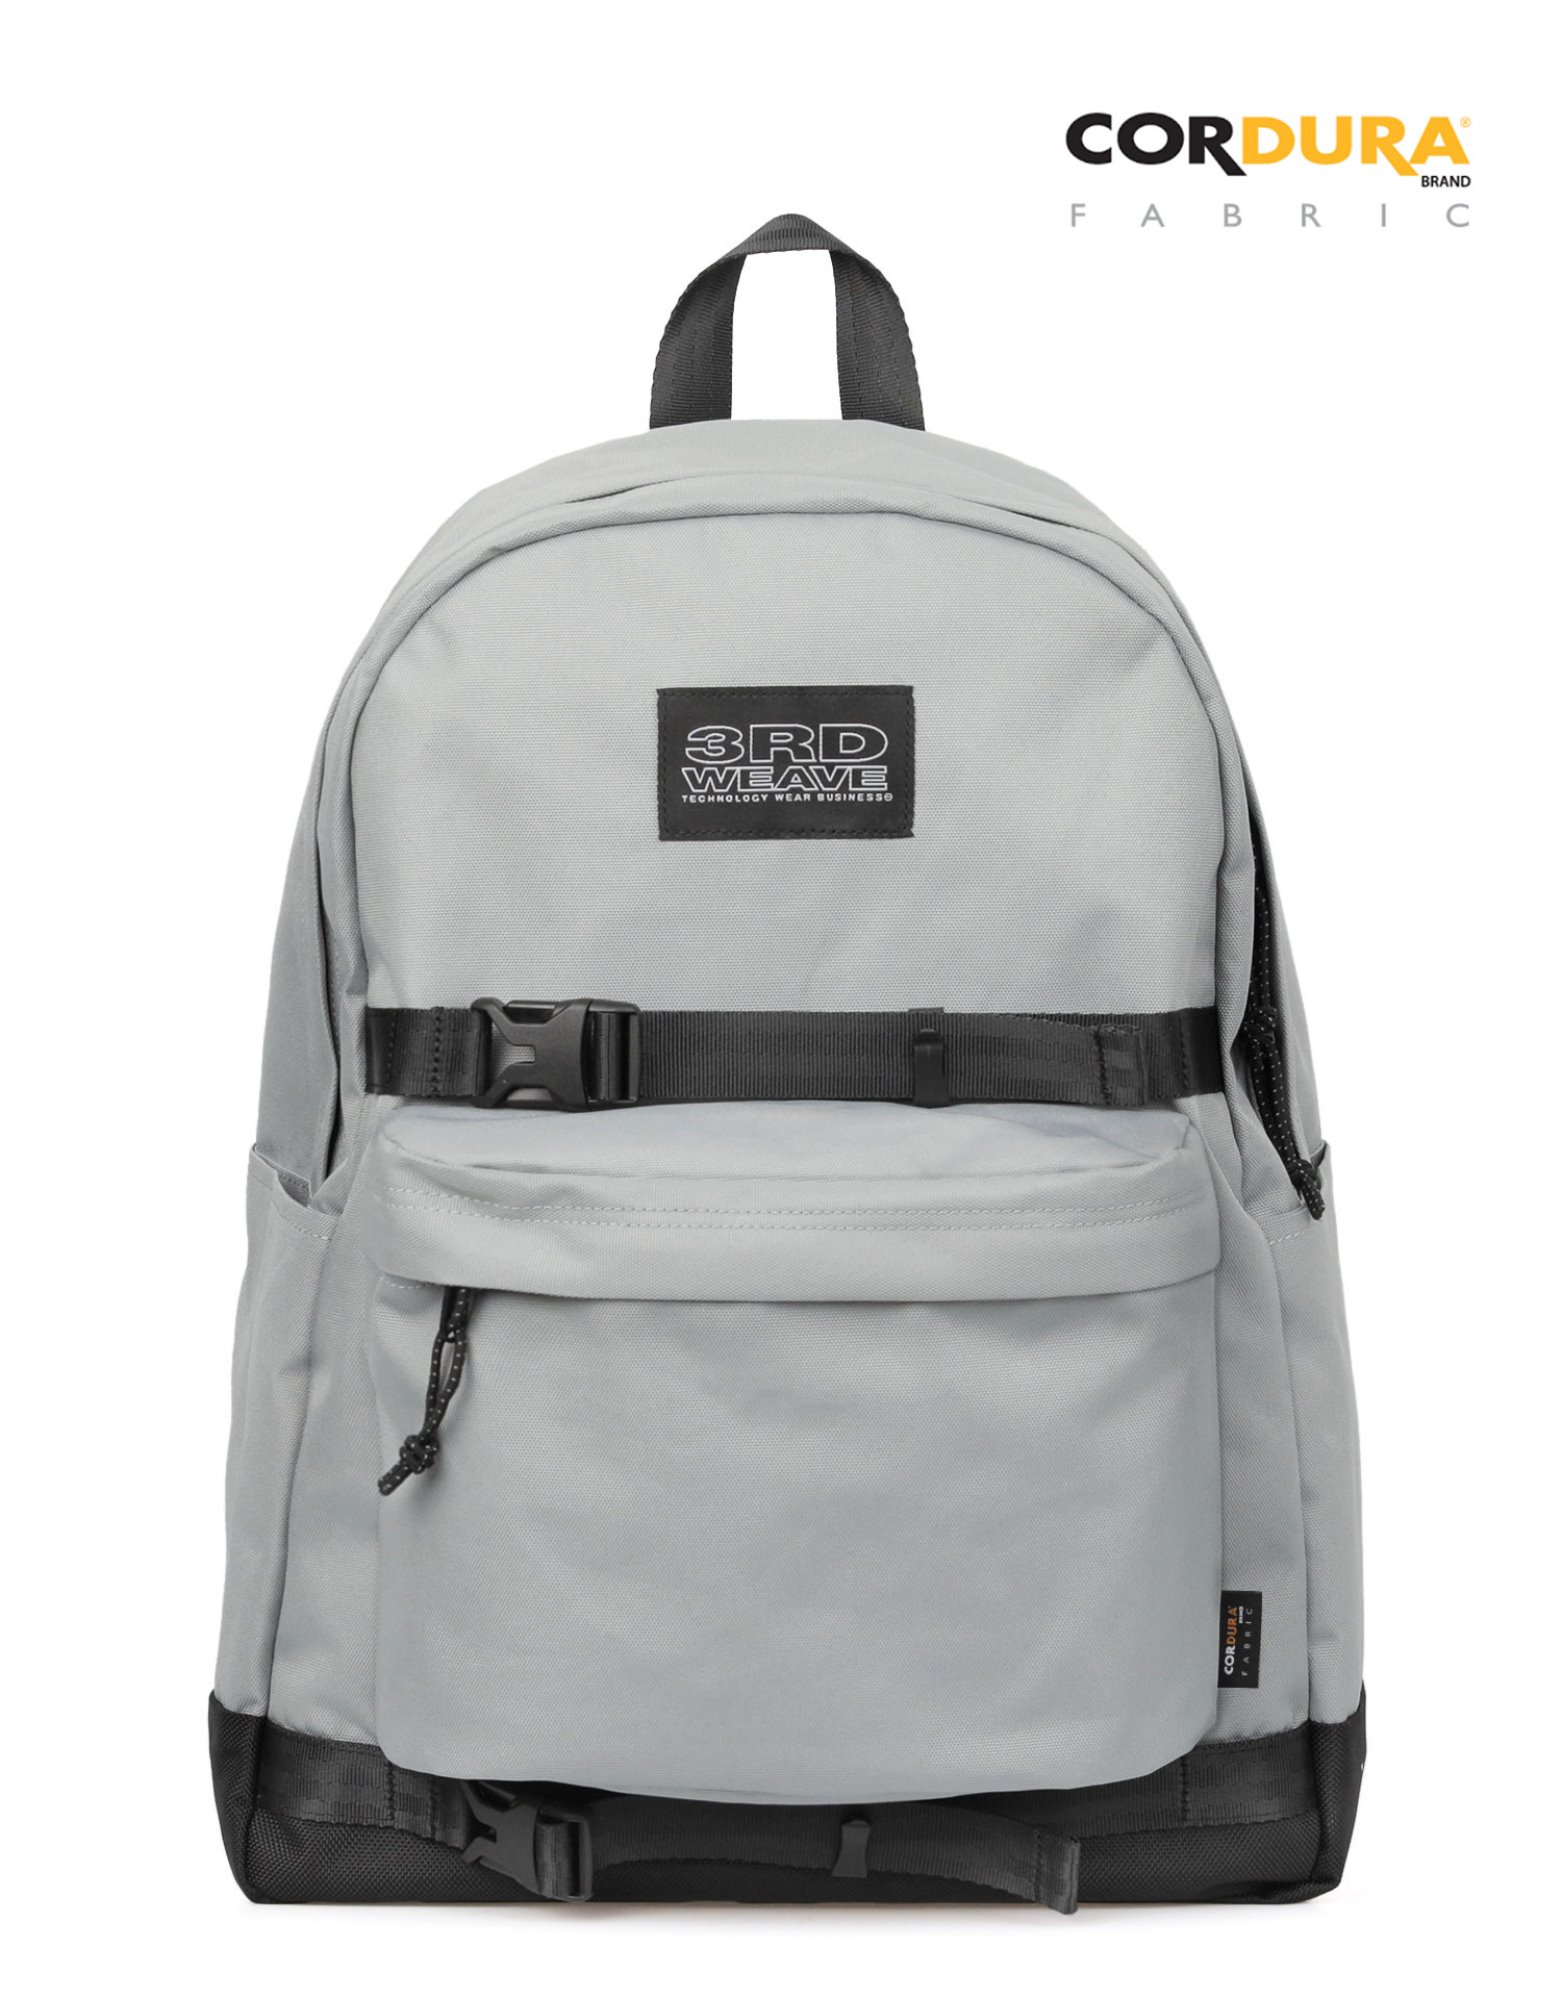 ESSENTIAL DAYPACK / GRAY